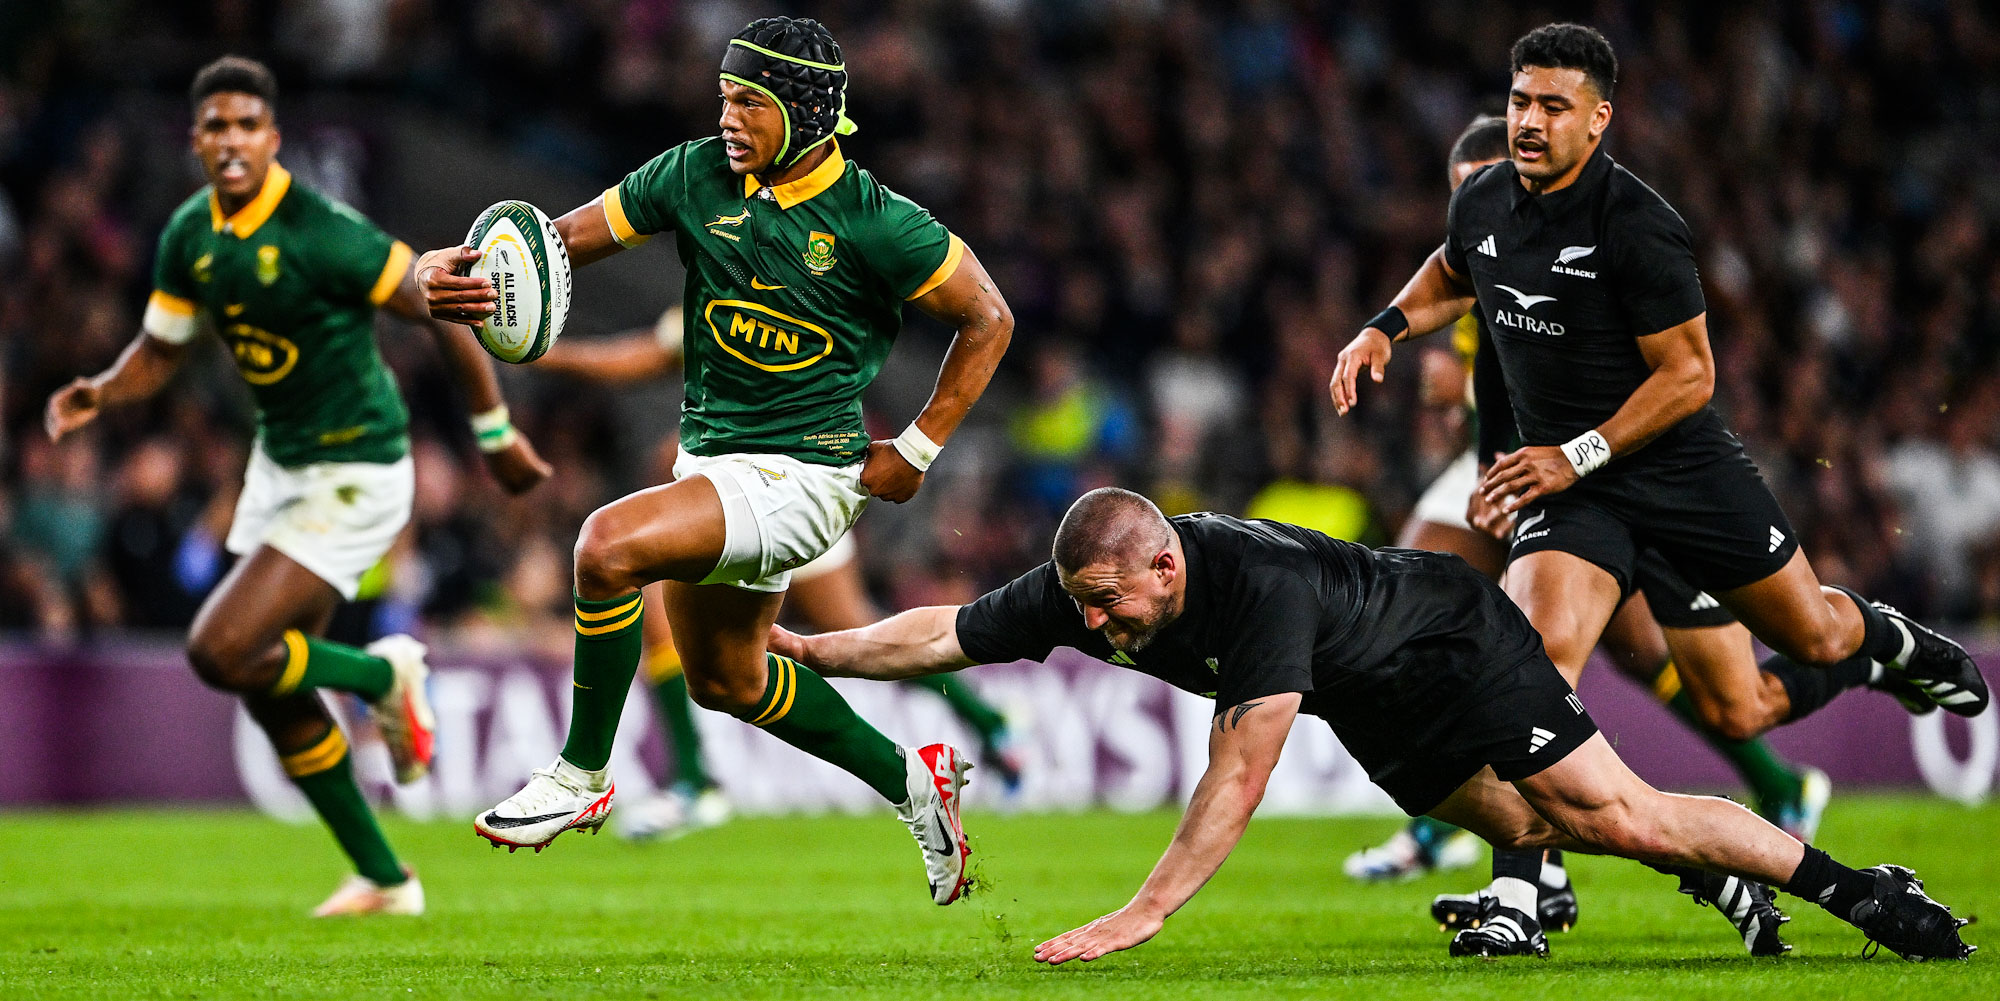 Kurt-Lee Arendse speeds away for his try as Dane Coles can't catch the Bok speedster.